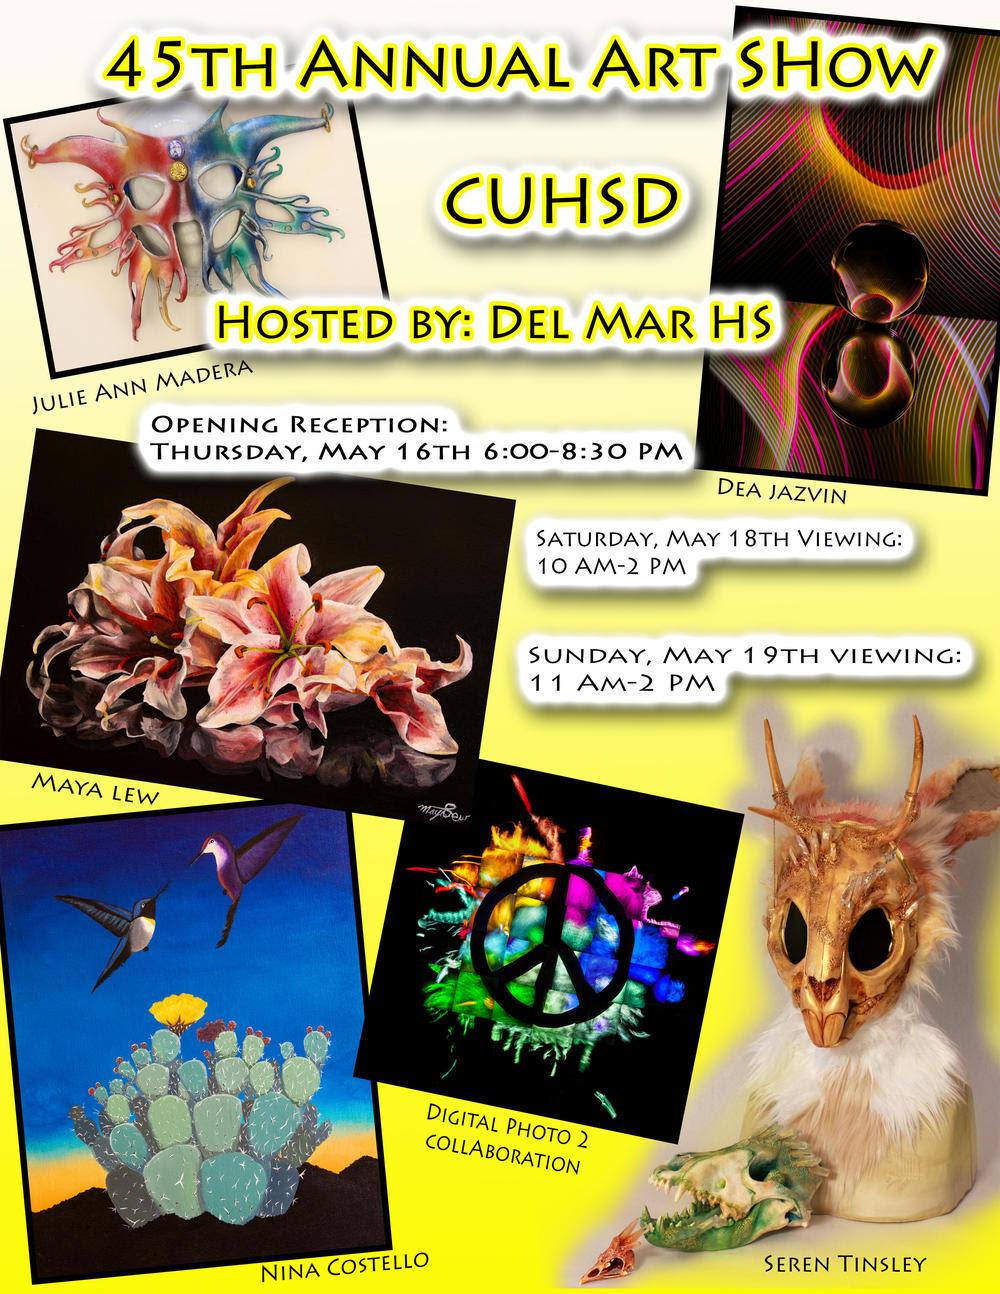 Image of District Art Show at Del Mar on May 16-19, 2019